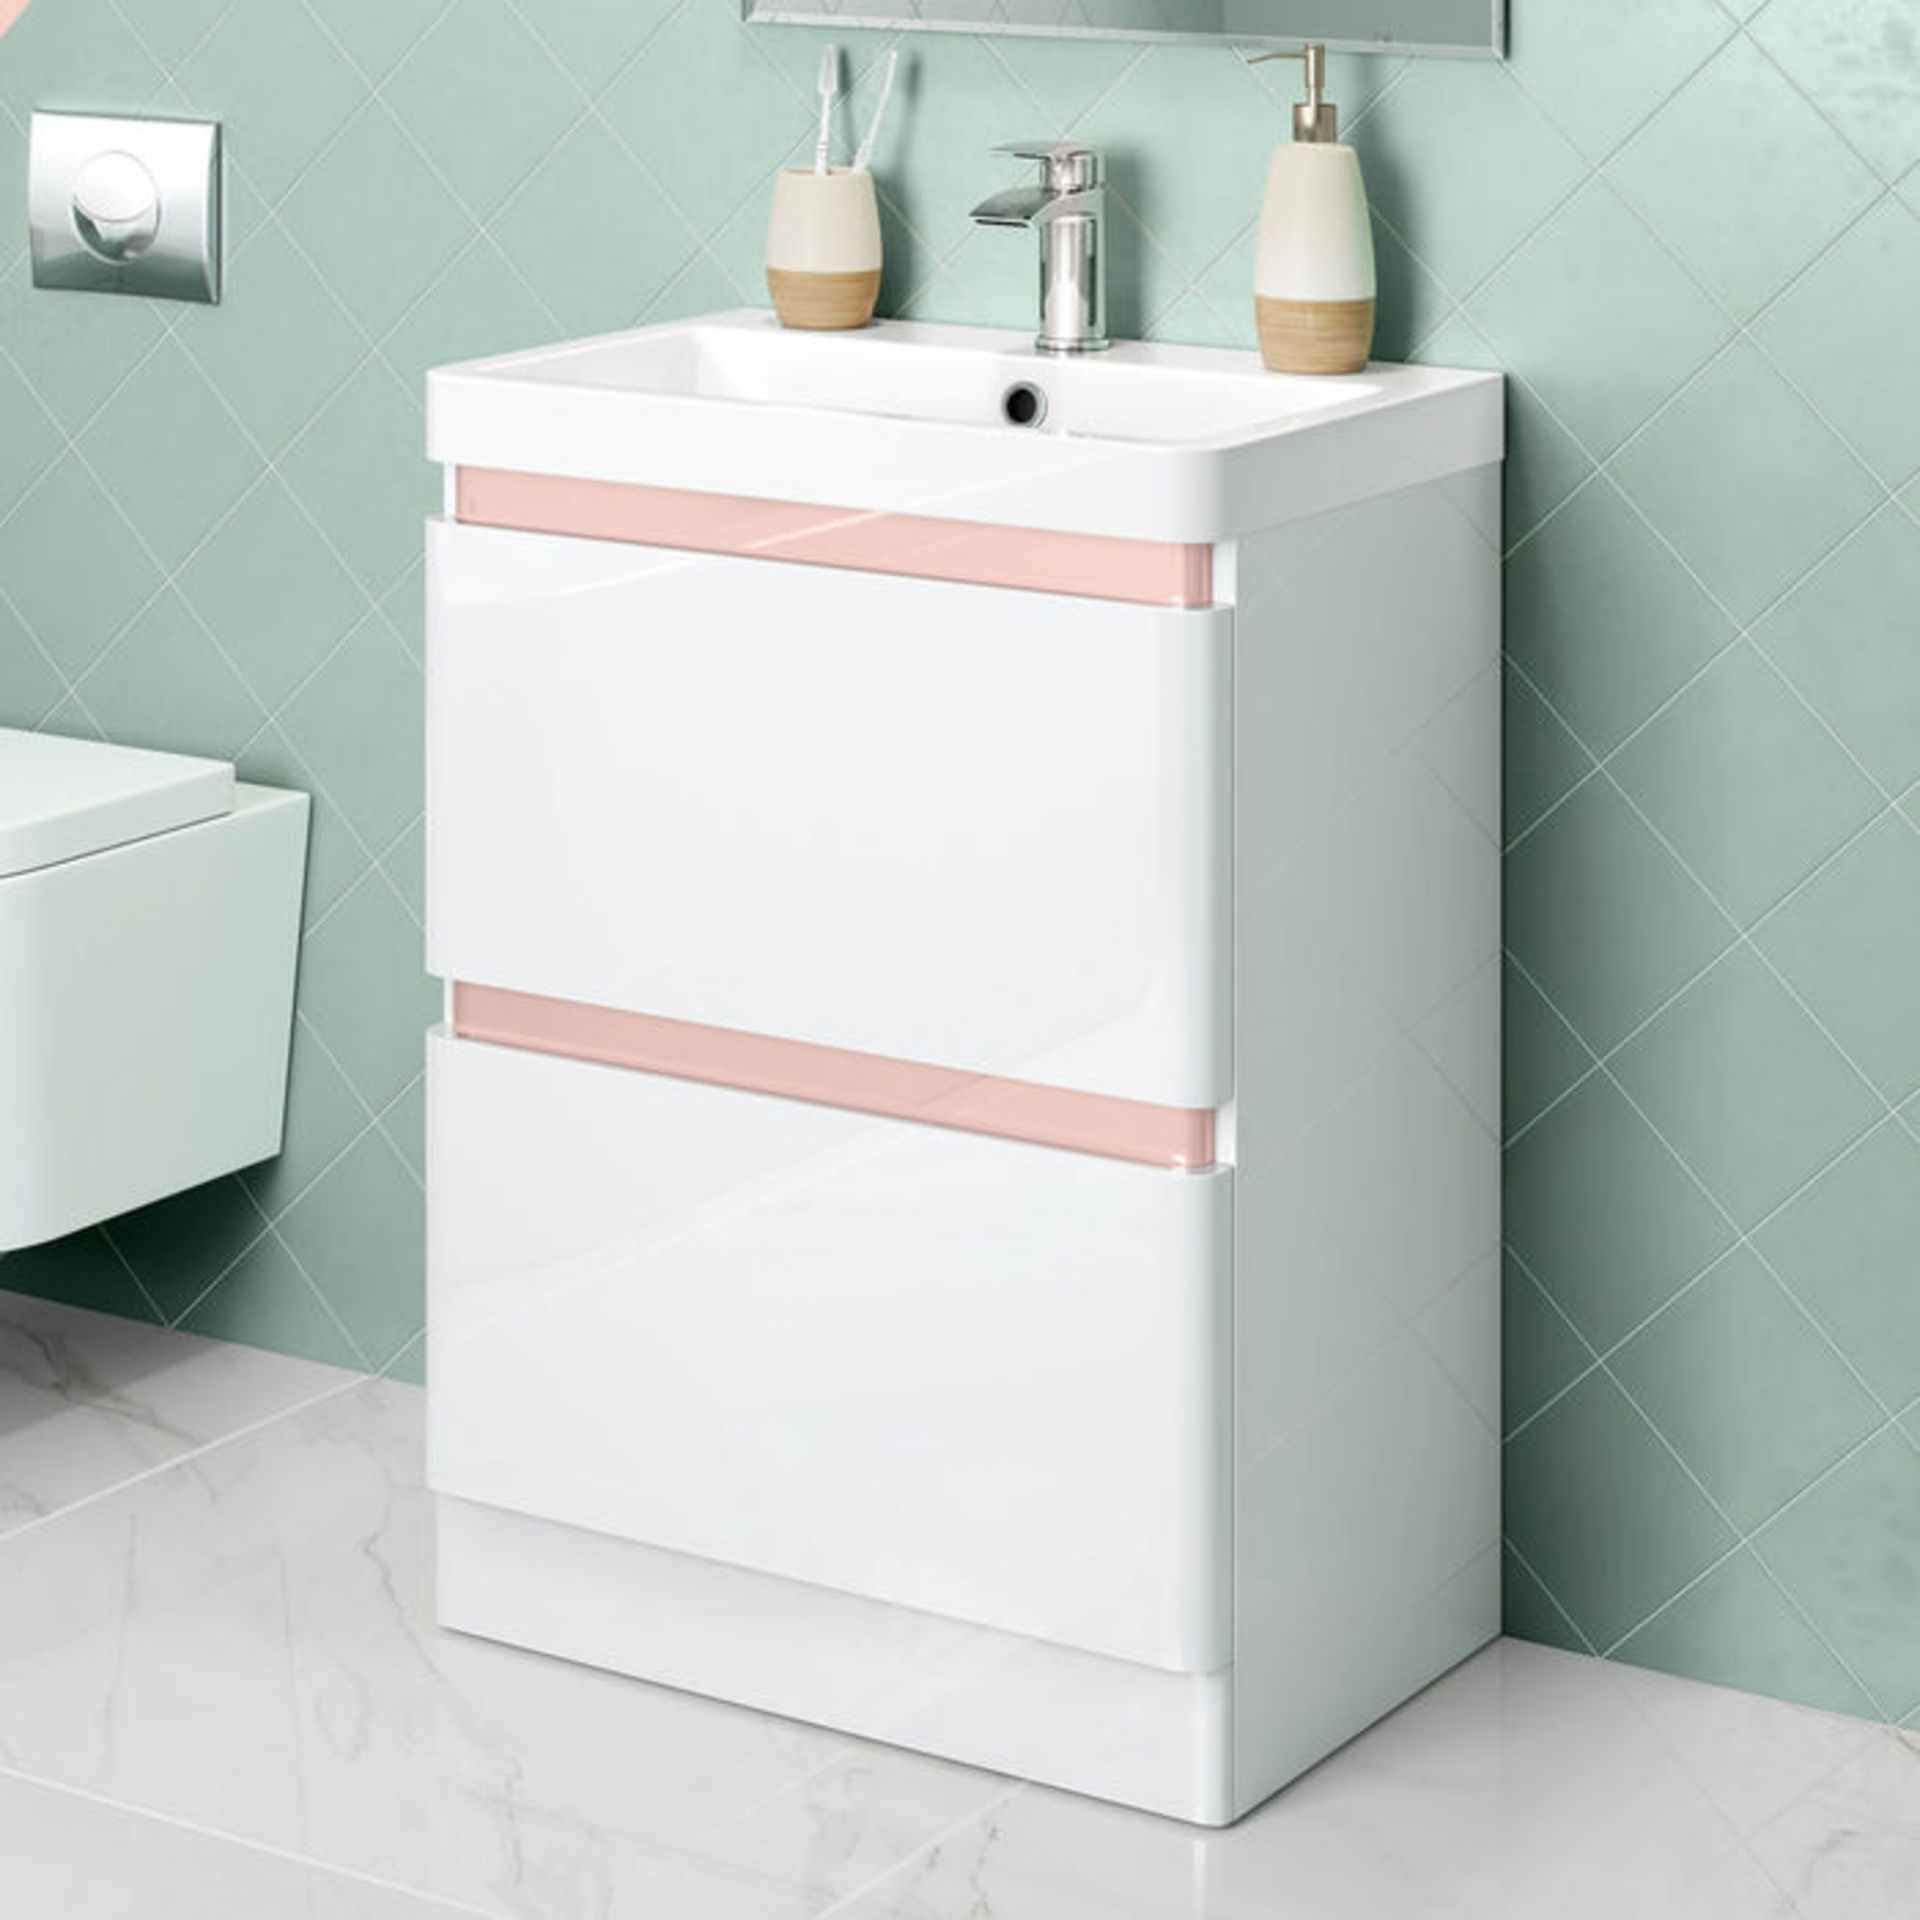 New & Boxed 600mm Denver Floor Standing Vanity Unit - Rose Gold Edition. RRP £749.99.Comes Co...